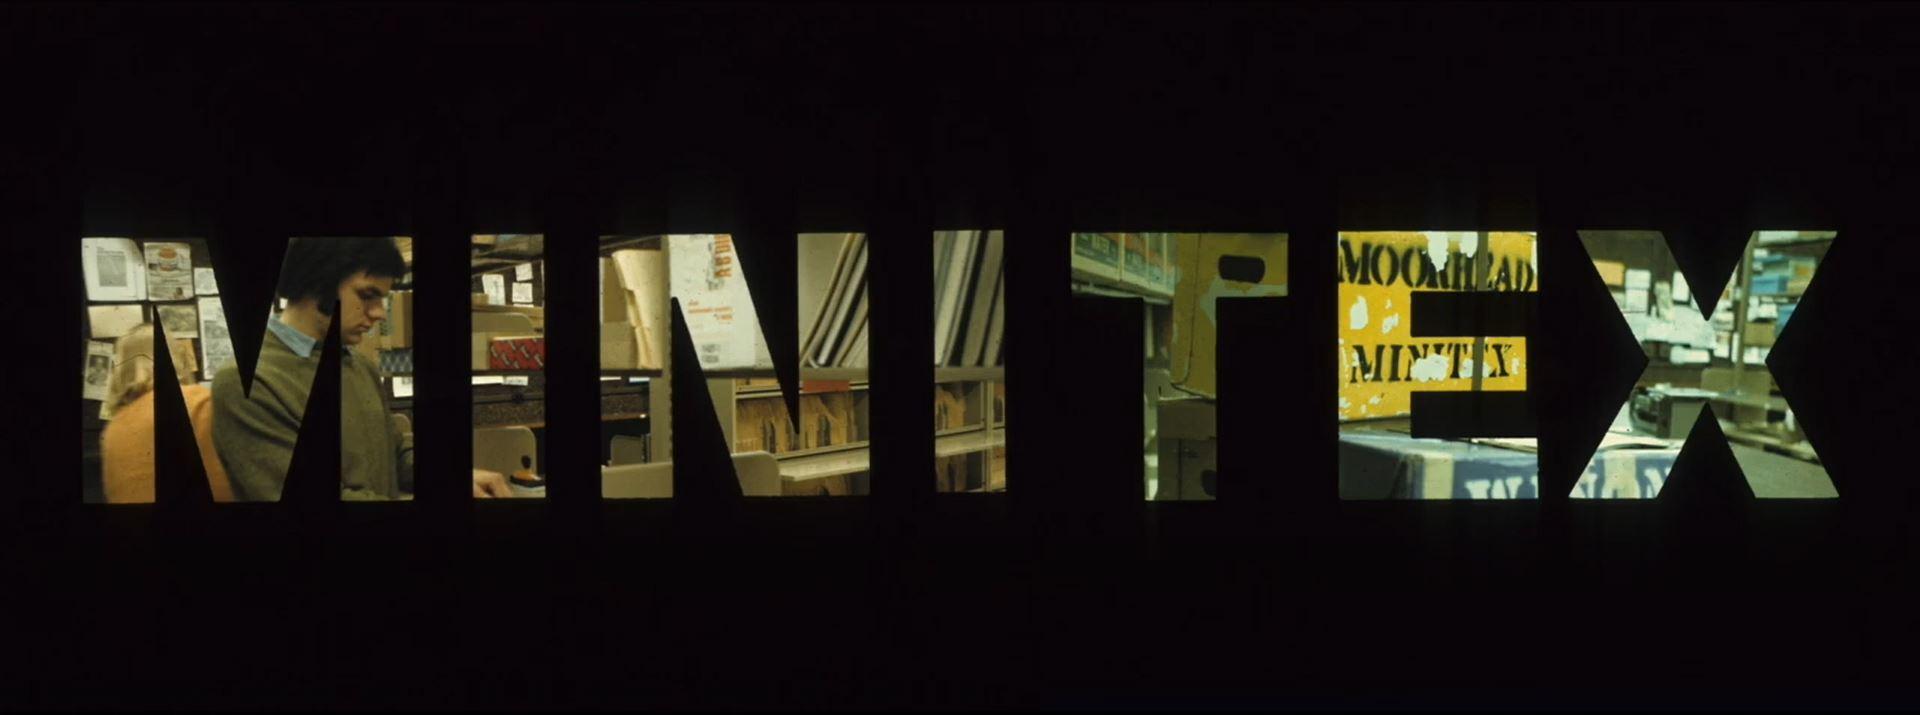 The word "MINITEX" cut from photographs of library work and workers, set over a black background.